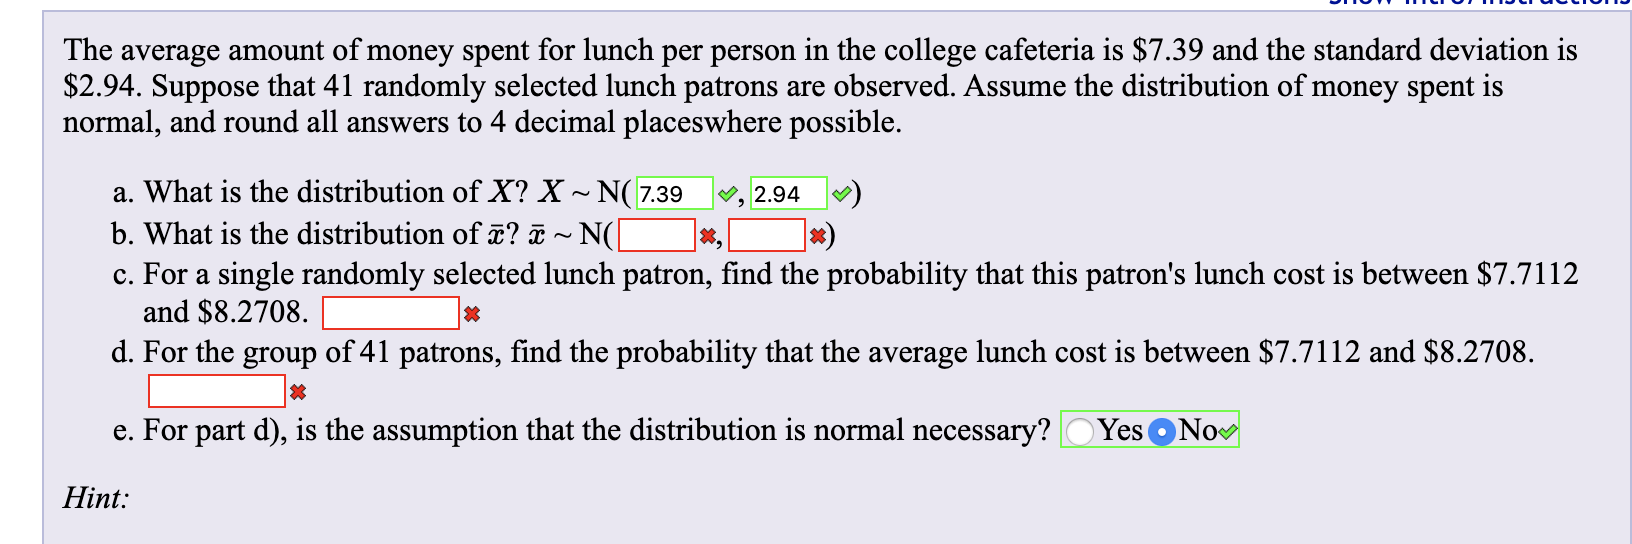 The average amount of money spent for lunch per person in the college cafeteria is $7.39 and the standard deviation is
$2.94. Suppose that 41 randomly selected lunch patrons are observed. Assume the distribution of money spent is
normal, and round all answers to 4 decimal placeswhere possible
a. What is the distribution of X? X~ N(7.39
b. What is the distribution of ? a~ N(]
c. For a single randomly selected lunch patron, find the probability that this patron's lunch cost is between $7.7112
and $8.2708
d. For the group of 41 patrons, find the probability that the average lunch cost is between $7.7112 and $8.2708
2.94
Yes ONo
e. For part d), is the assumption that the distribution is normal necessary?
Hint:
